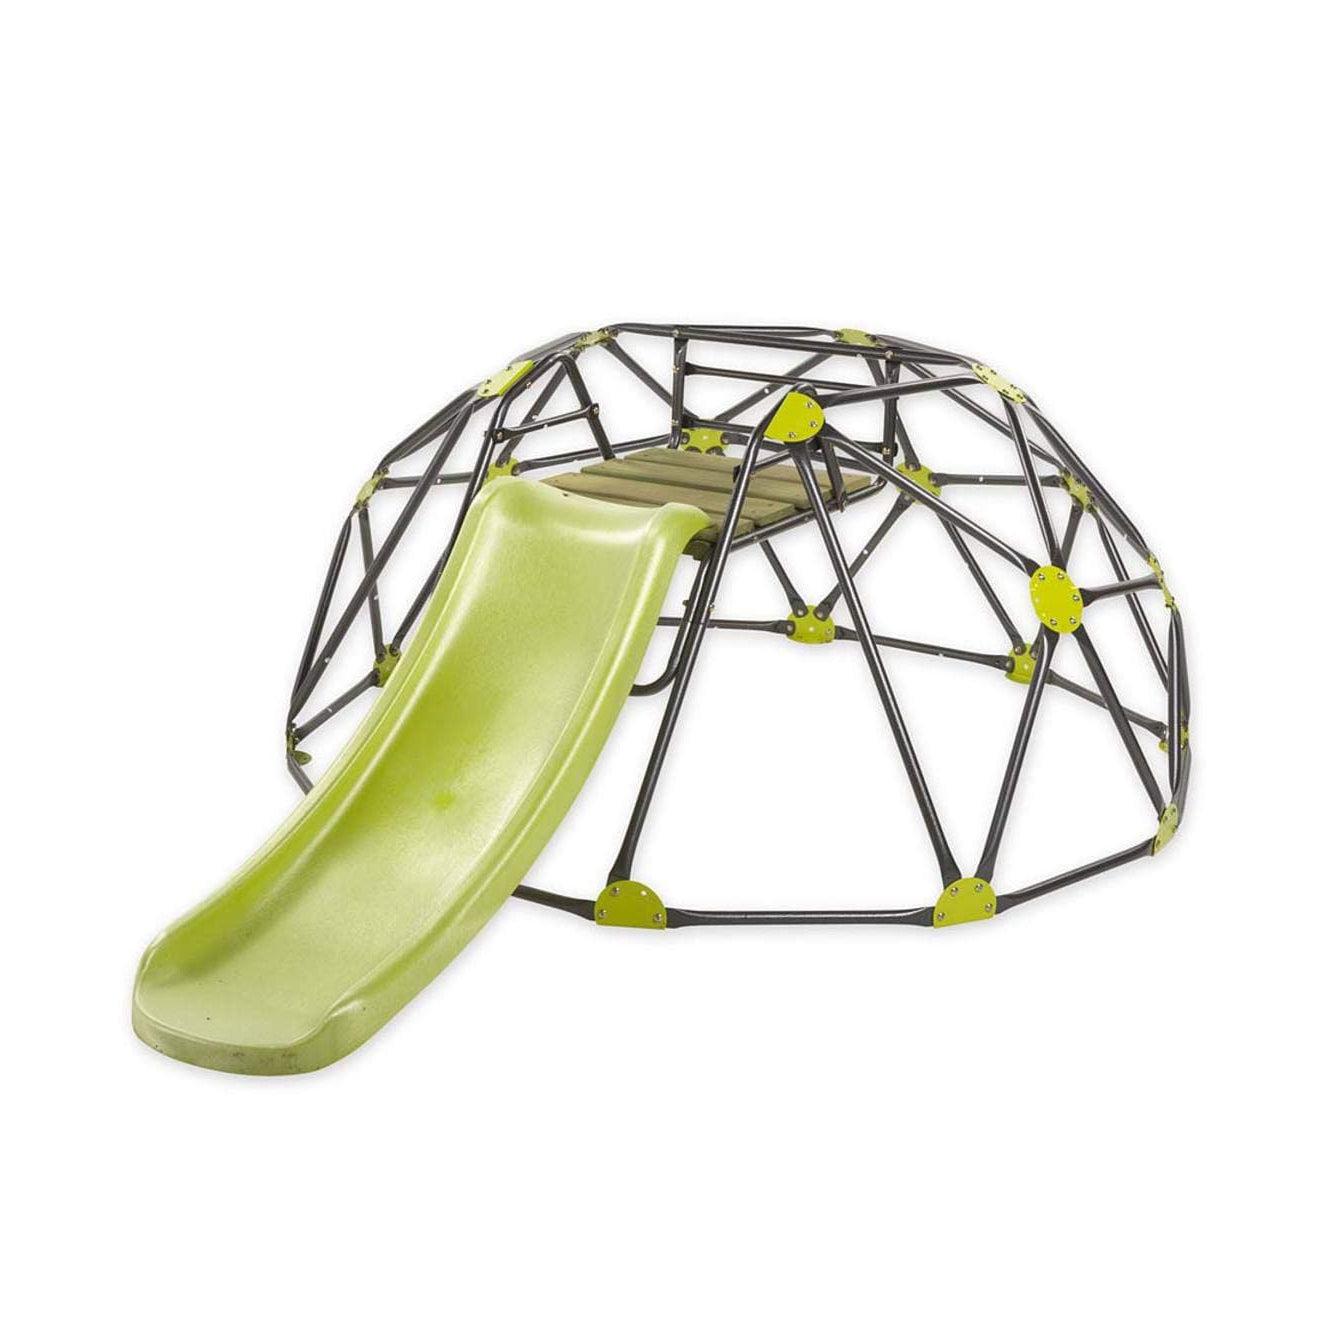 HearthSong-Climbing Dome with Slide-CG731381-Legacy Toys